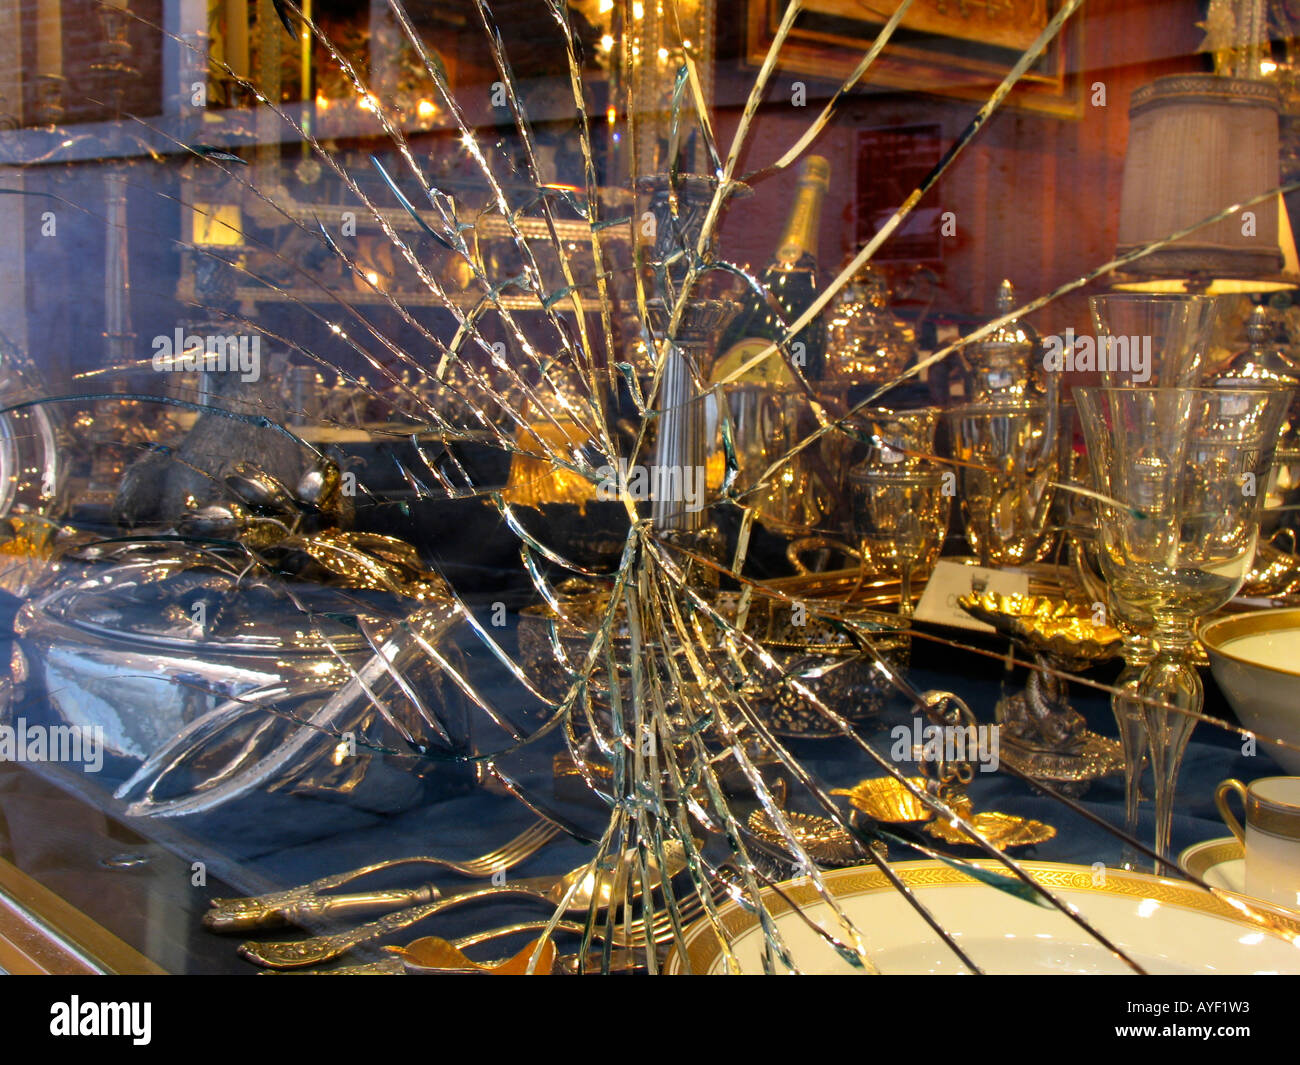 Smash and grab in antique shop Stock Photo